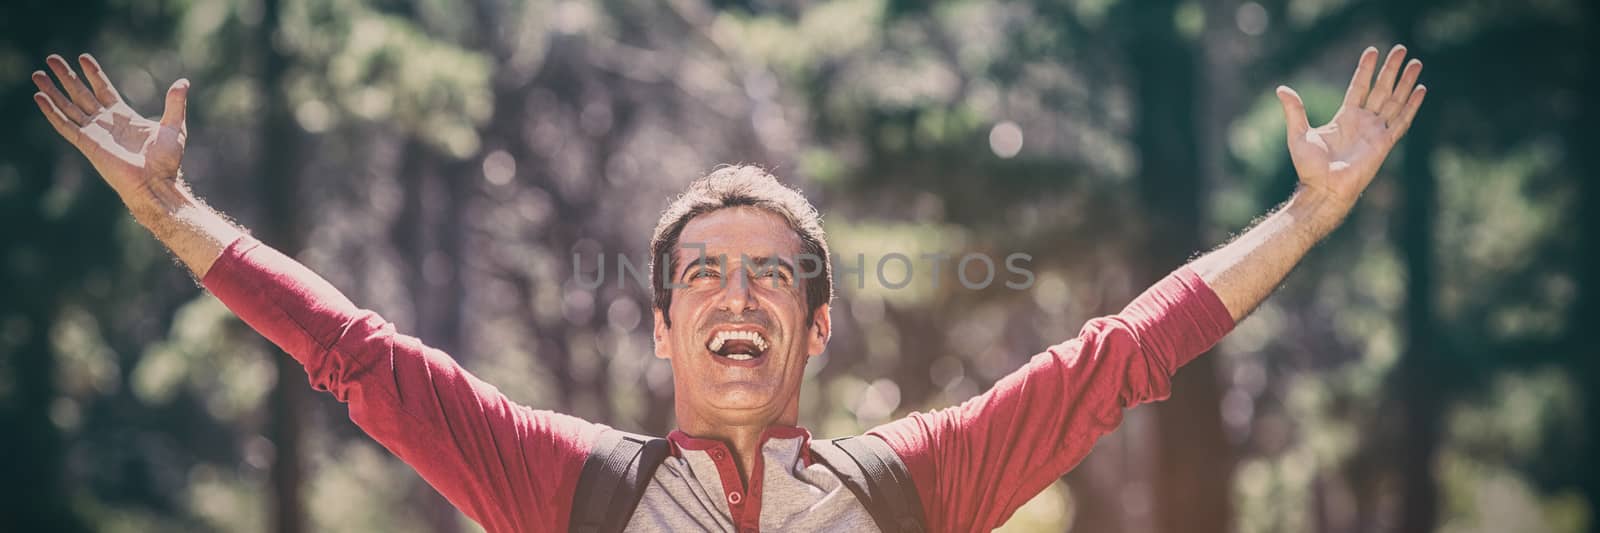 Man smiling and throwing up arms  by Wavebreakmedia